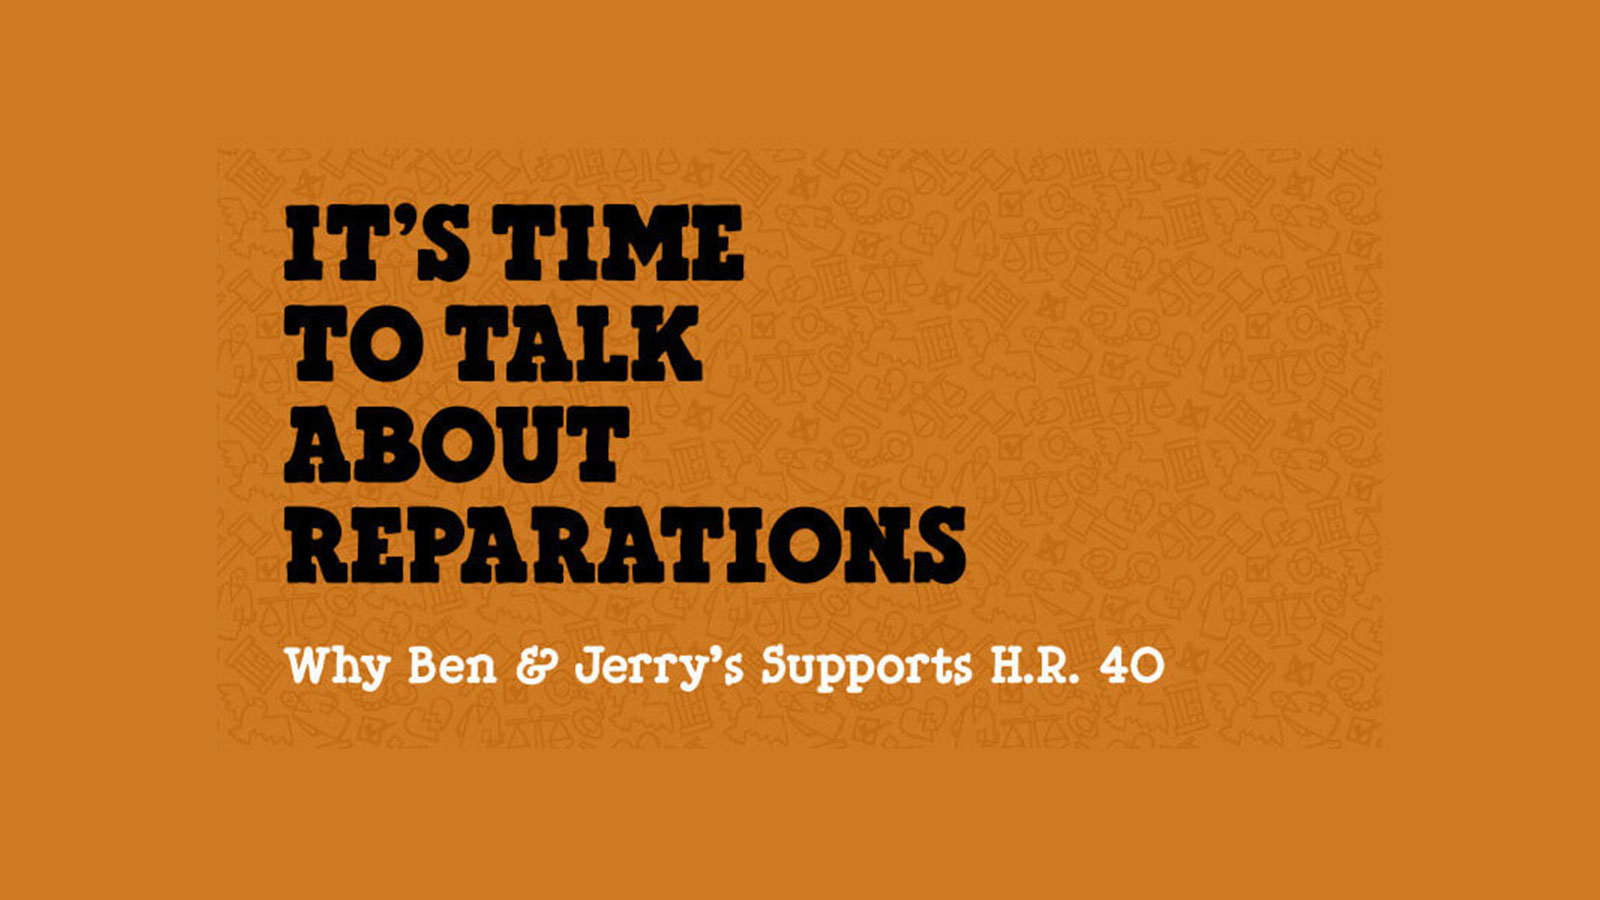 Ben & Jerry's Stands in Support of H.R. 40 and Reparations for African Americans